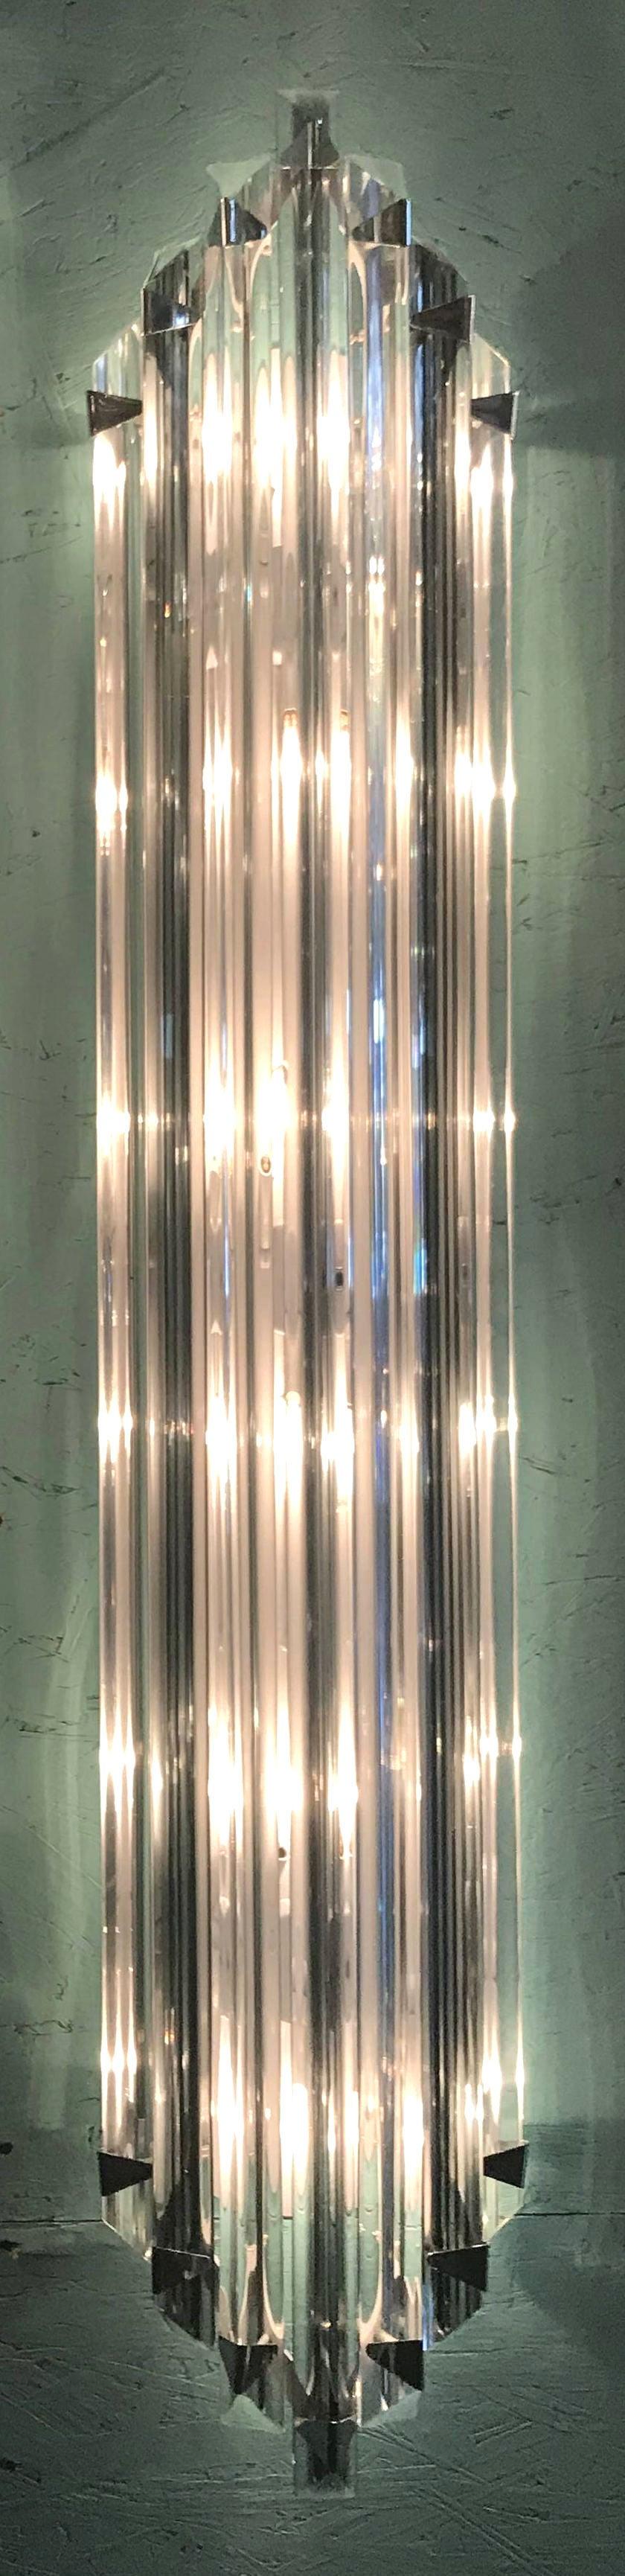 Italian wall light with clear crystals individually hand blown with smoky stripes and cut to three points in Triedri technique, mounted on chrome hardware and white metal back plate / Designed by Fabio Bergomi for Fabio Ltd / Made in Italy.
6 lights